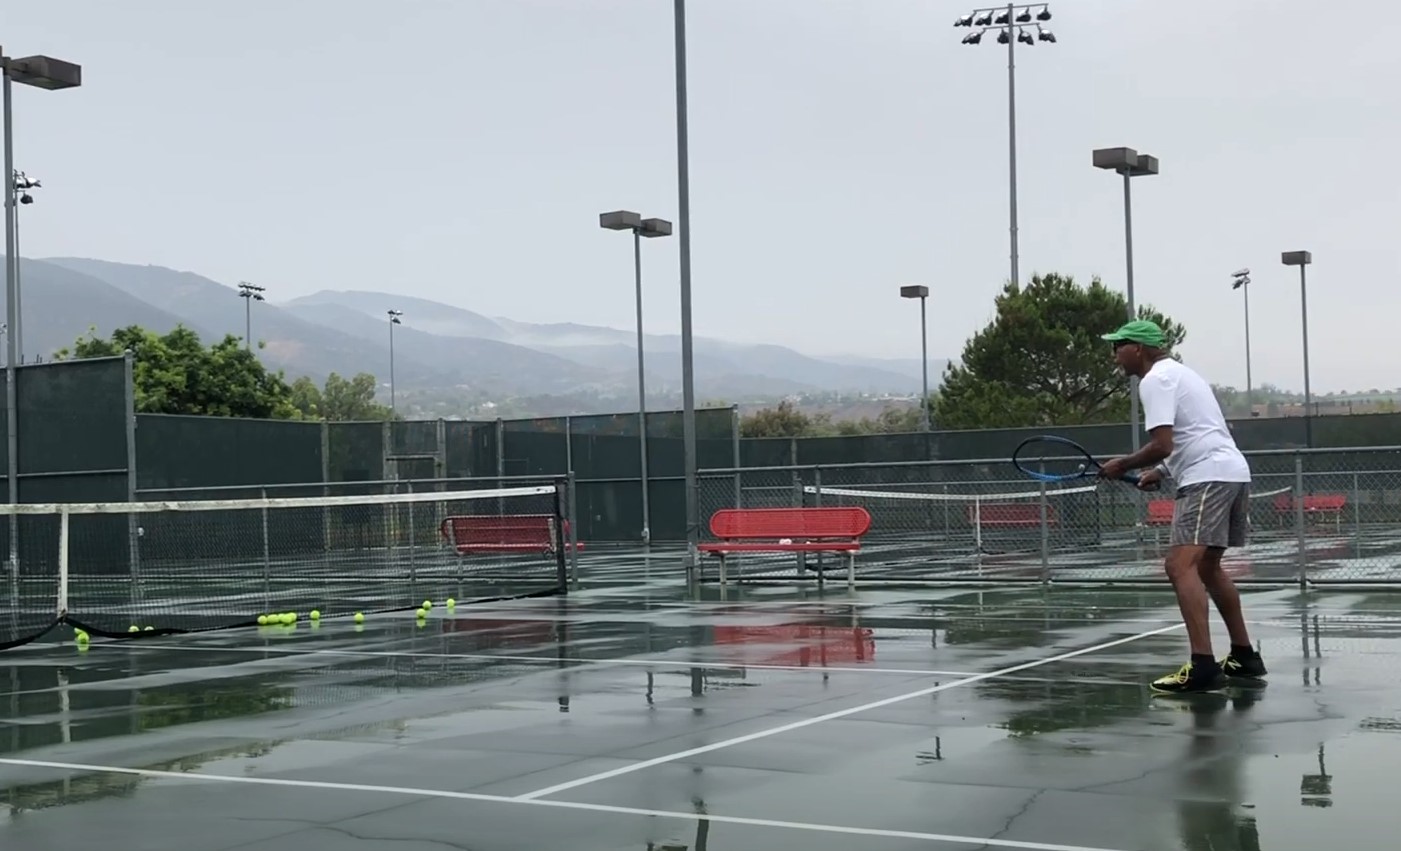 man playing tennis on a court soaked by rain